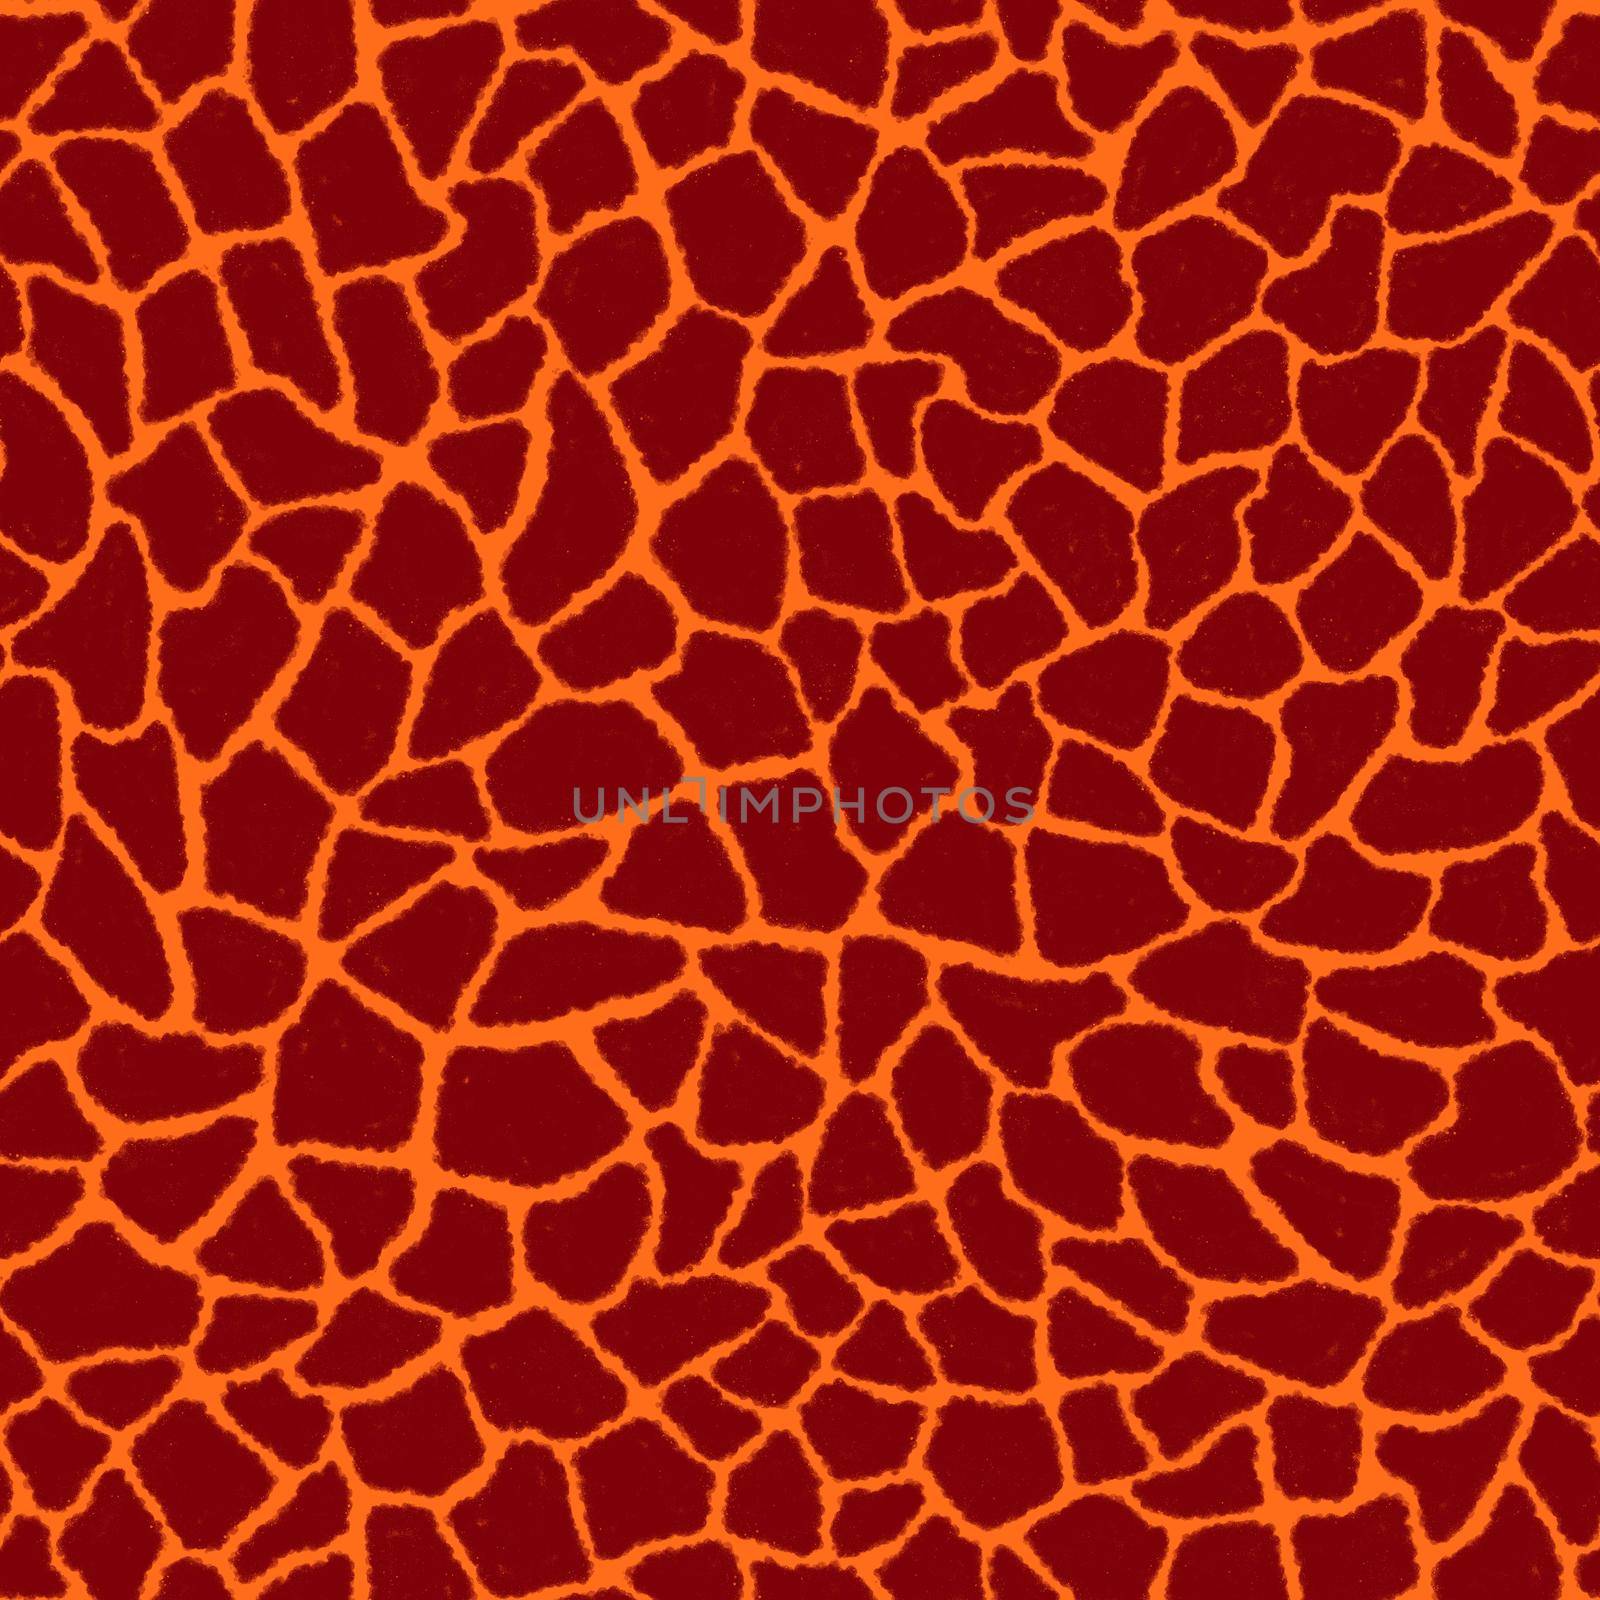 Giraffe skin color seamless pattern with fashion animal print for continuous replicate. Chaotic mosaic burgundy pieces on orange background. Wrapping paper, funny textile fabric print,design,decor by Angelsmoon